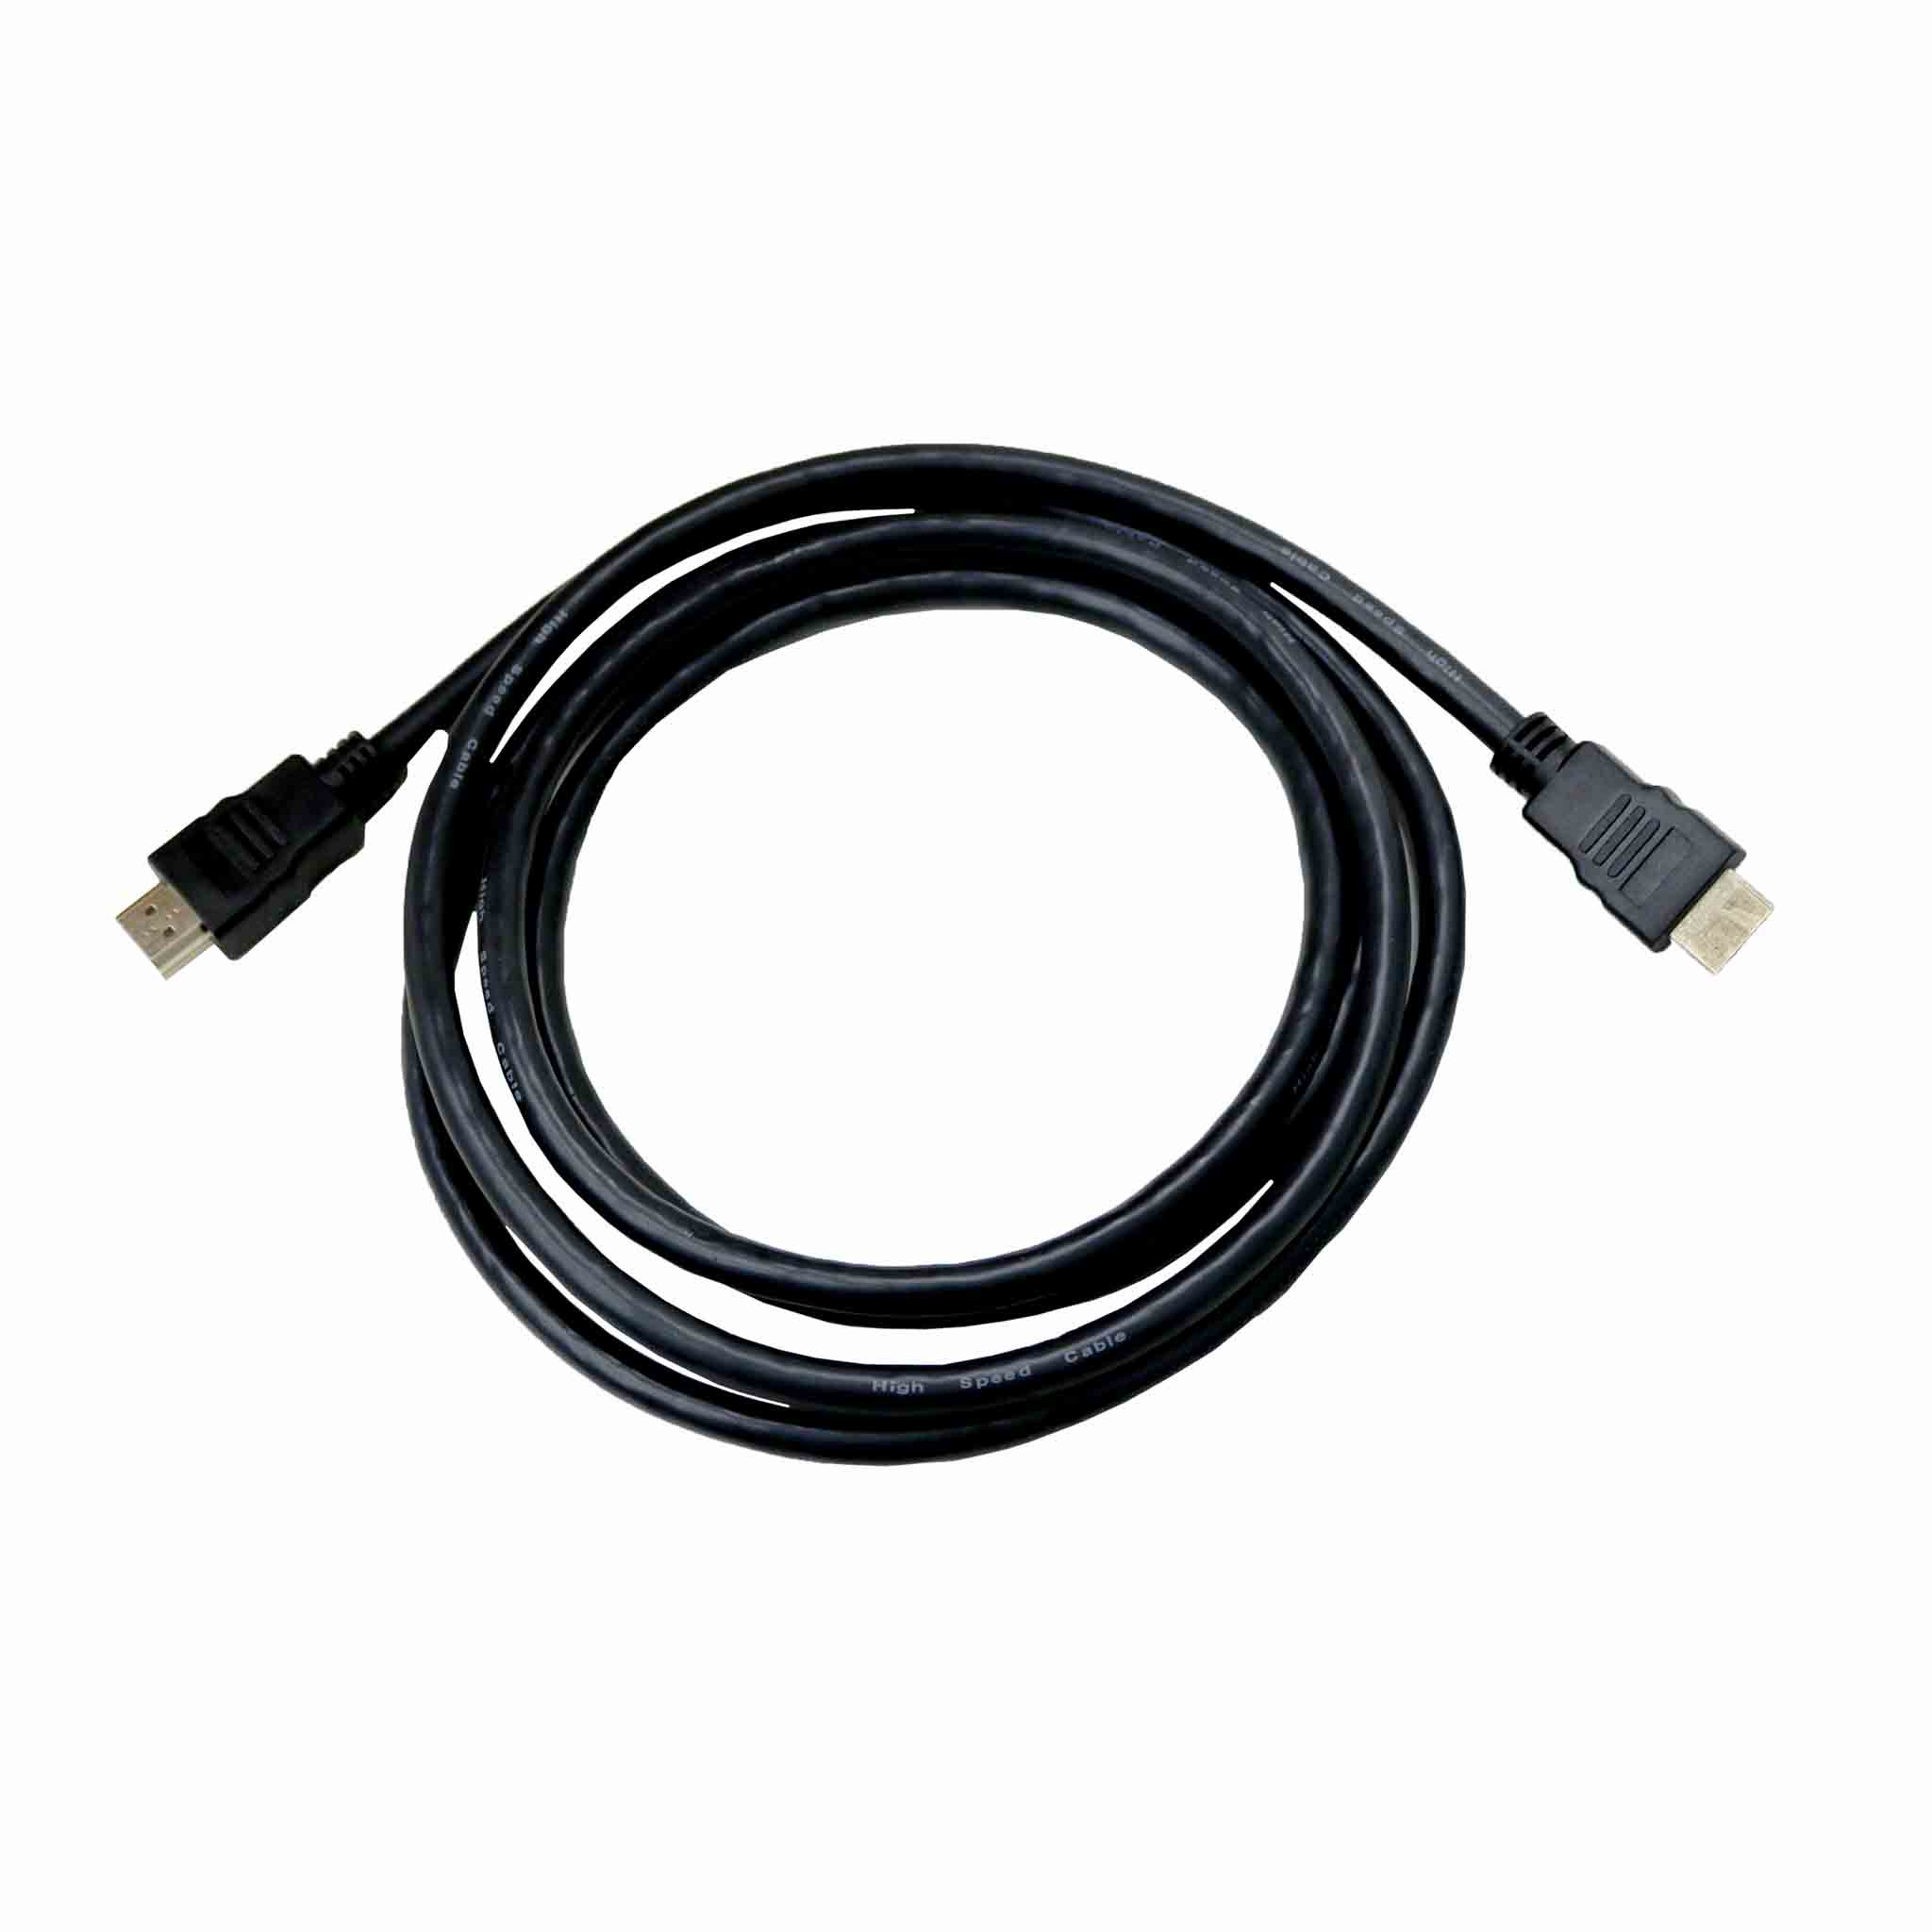 2m HDMI v1.4A Gold HDTV 4K 1080P Full HD Cable Lead